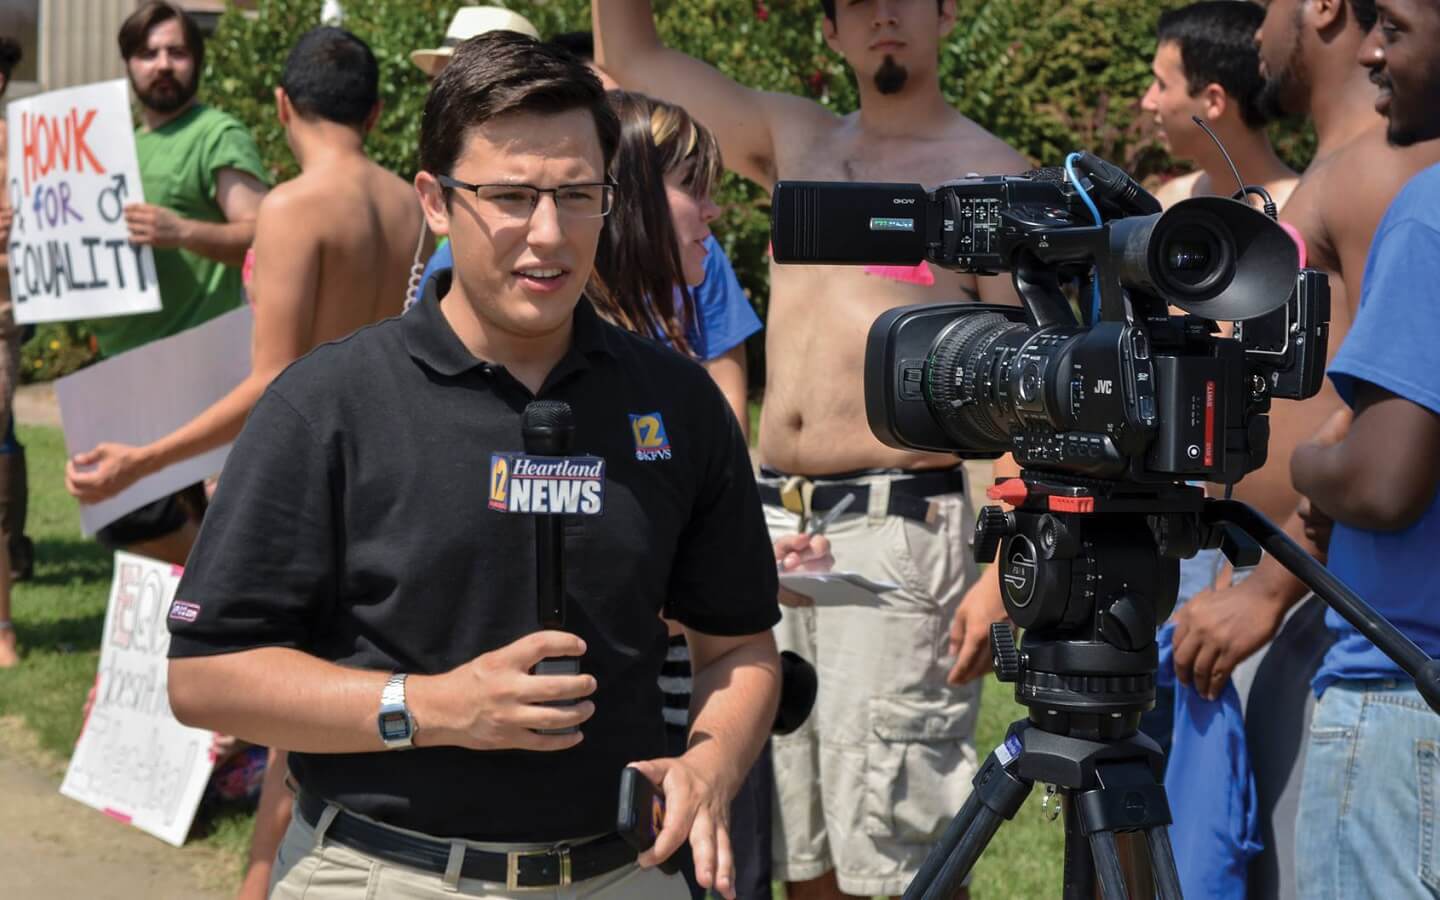 “I have my Roosevelt journalism professors to thank for preparing me well for this experience,” says Giacomo Luca, an award-winning journalist who is currently reporting for CBS/Fox affiliate KFVS-TV in Cape Girardeau, Mo.